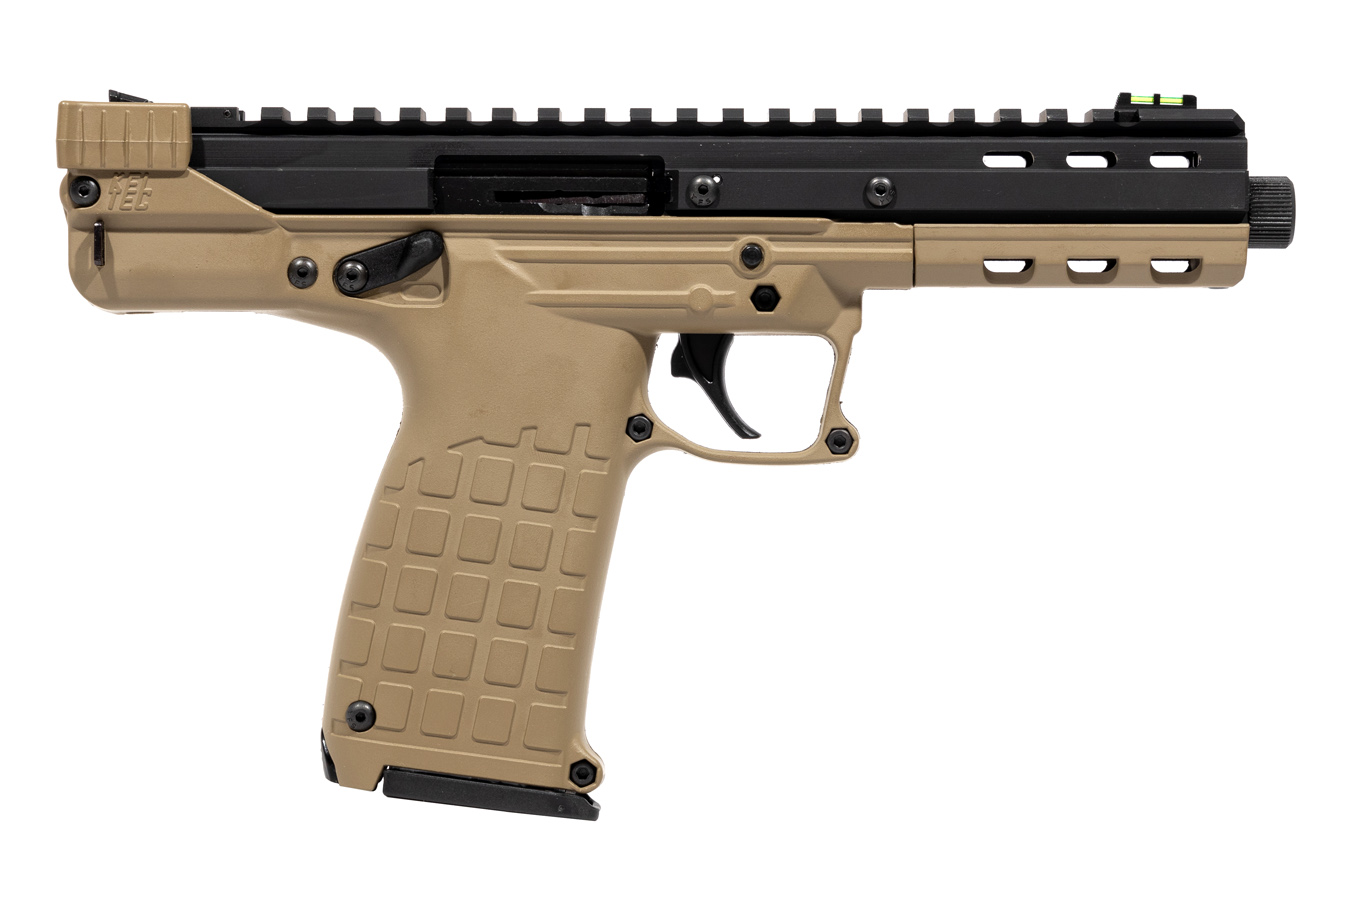 CP33 22LR PISTOL WITH TWO 33-ROUND MAGAZINES AND FDE FINISH